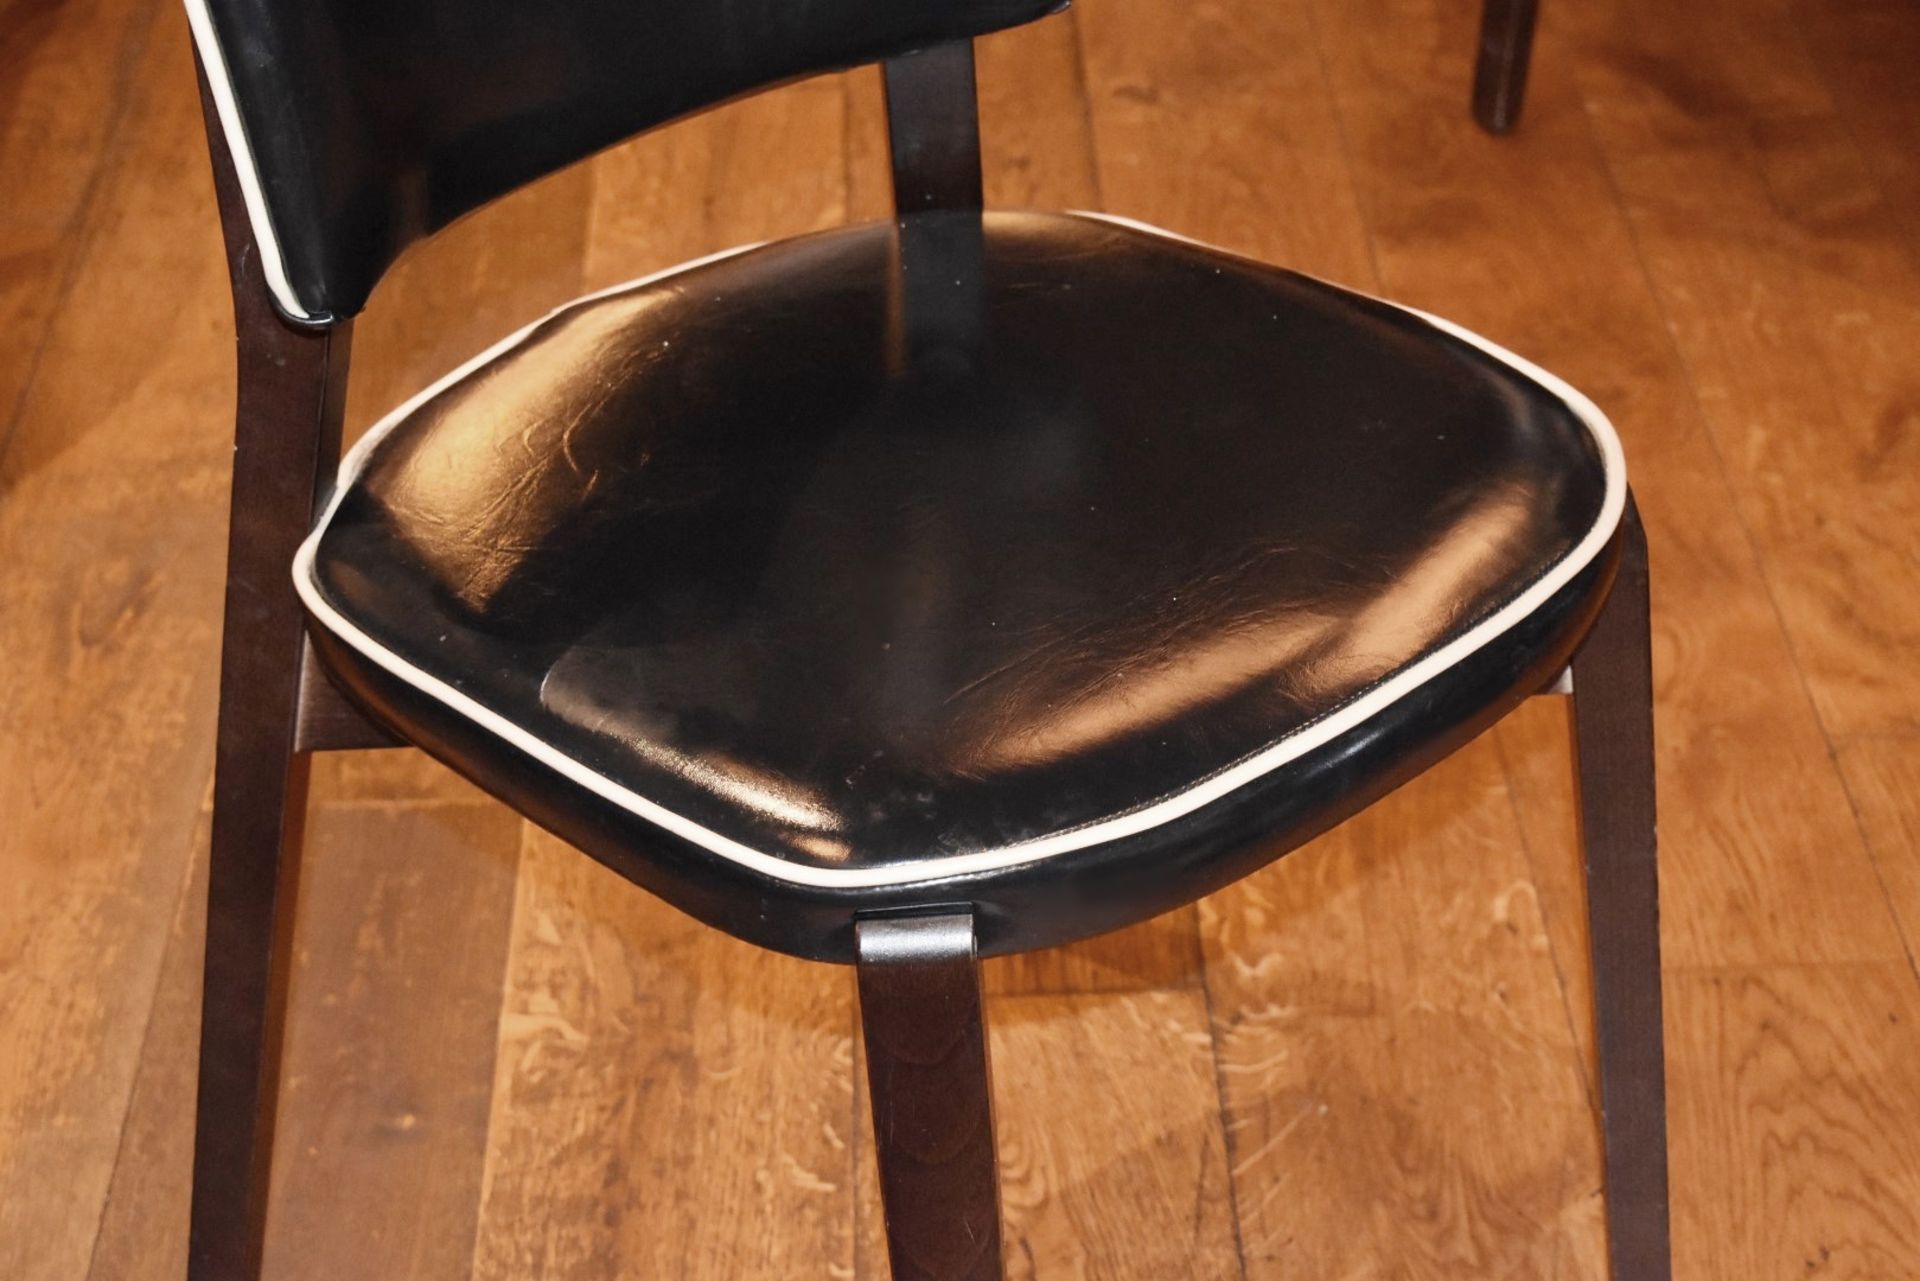 5 x Black Faux Leather Dining Chairs From Italian American Restaurant - Retro Design With Dark - Image 2 of 3